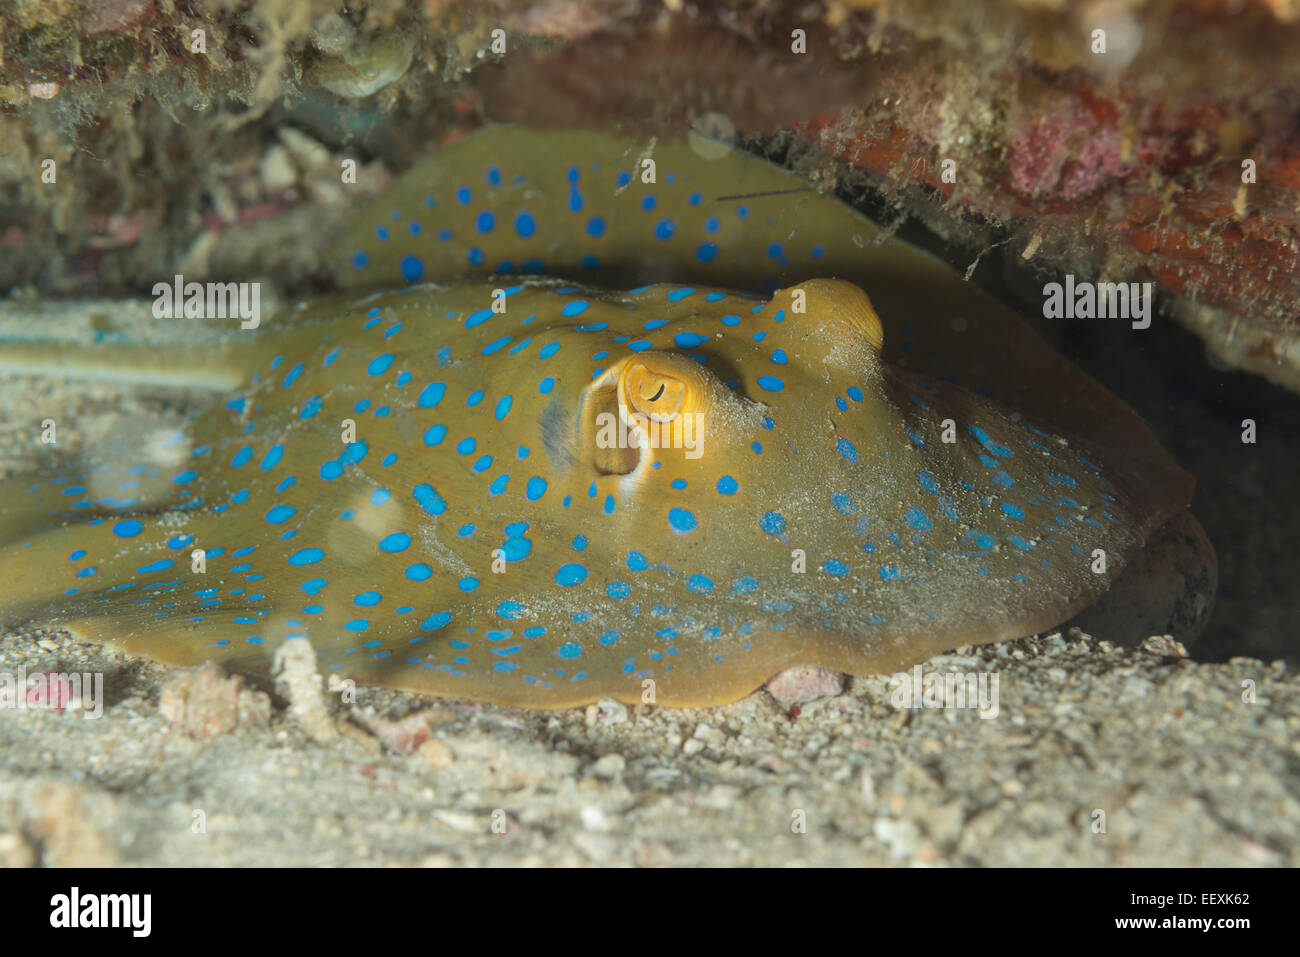 Blue-spotted ribbontail ray hiding under a hard coral Stock Photo